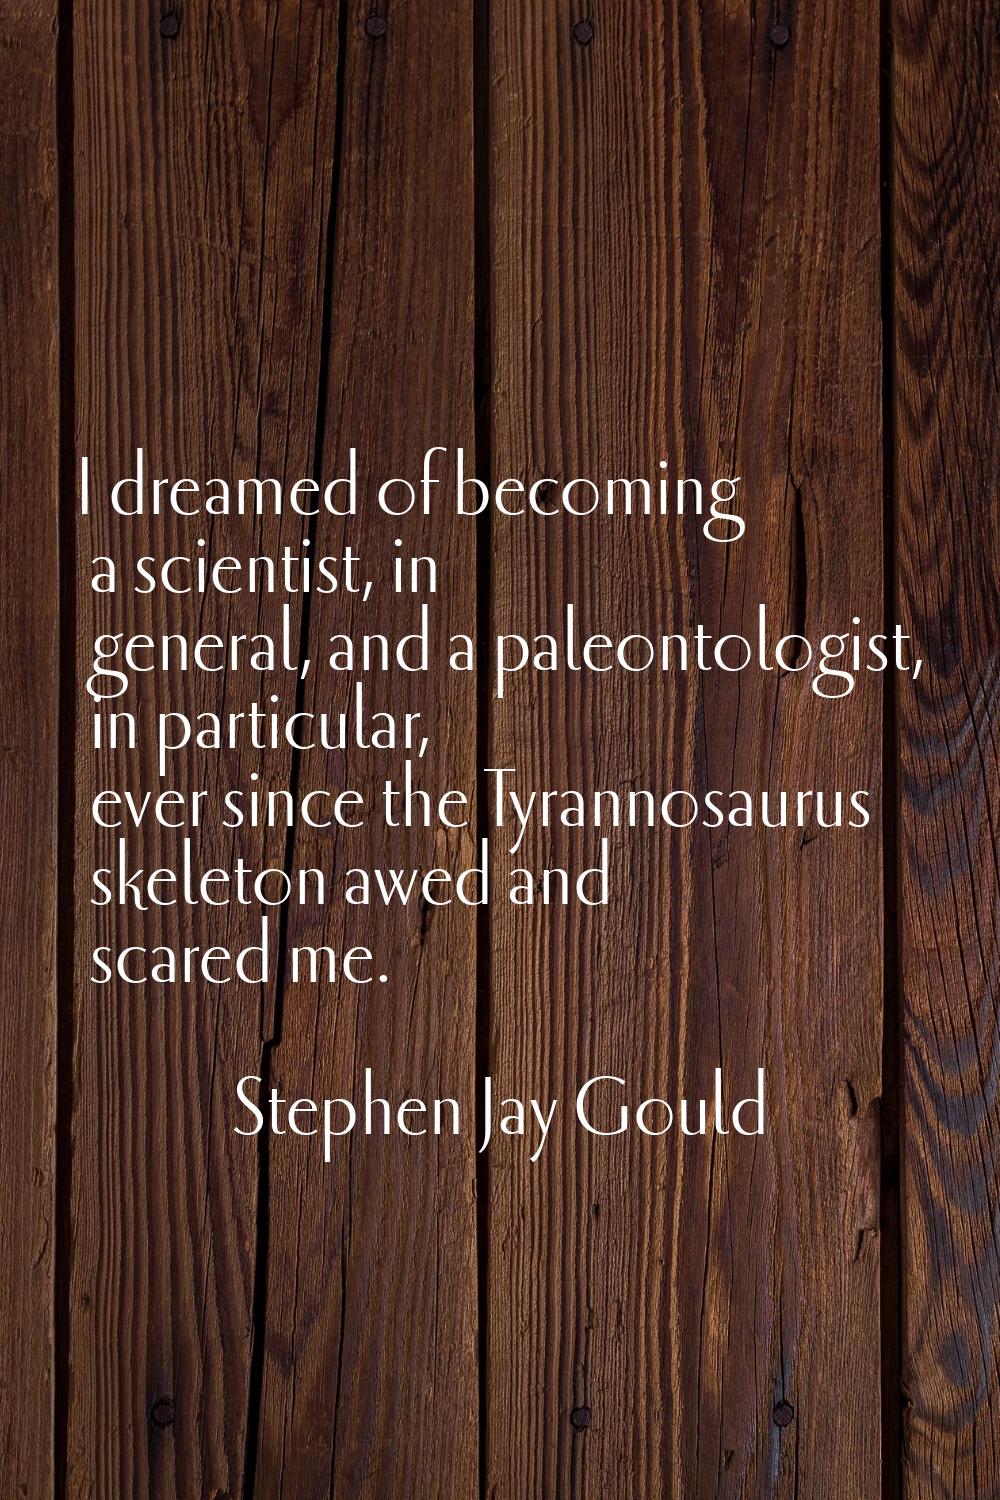 I dreamed of becoming a scientist, in general, and a paleontologist, in particular, ever since the 